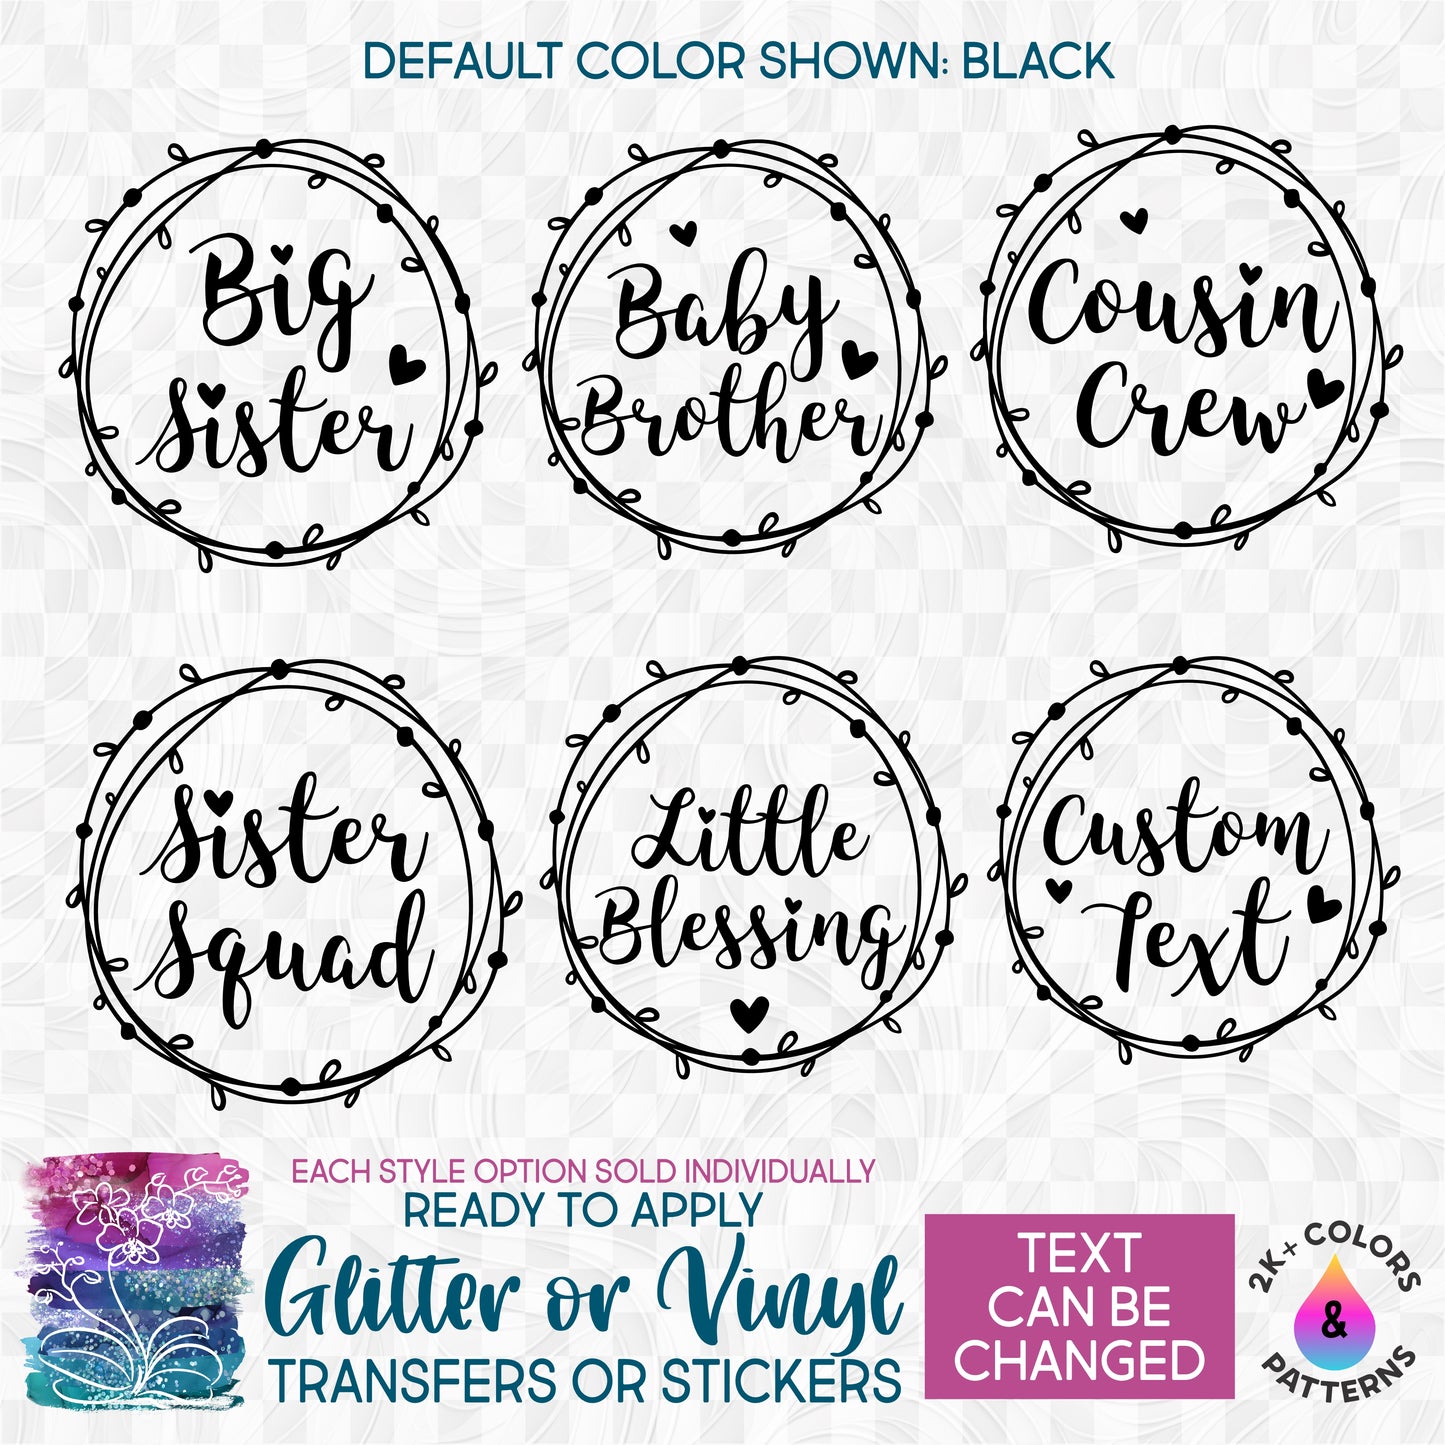 (s122-X1) Big, Little, Brother, Sister, Cousin Custom Text Glitter or Vinyl Iron-On Transfer or Sticker